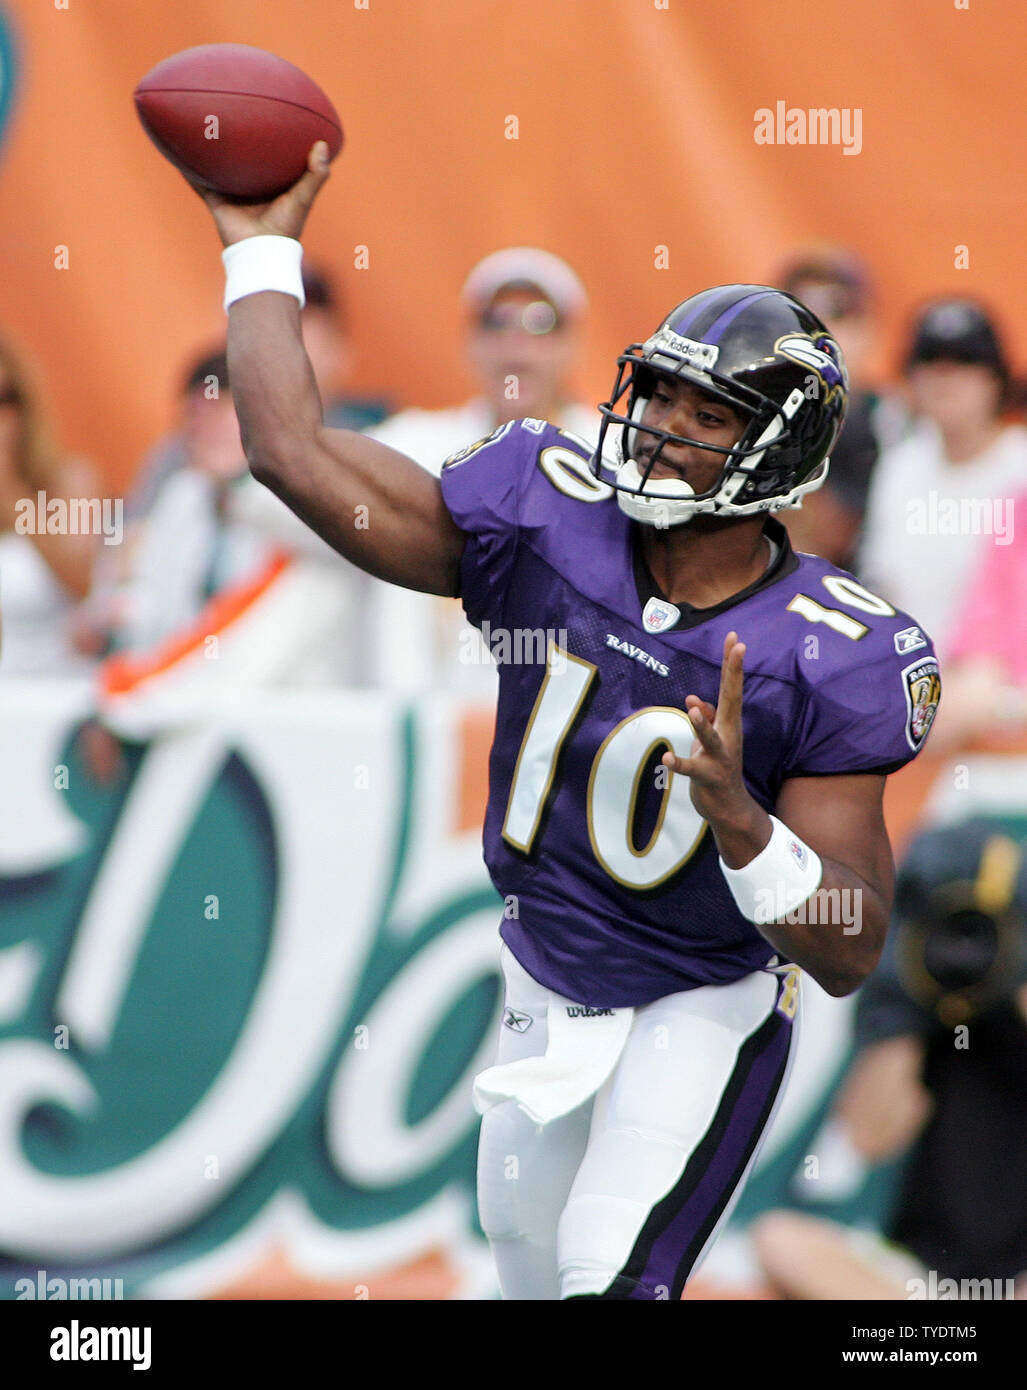 Baltimore Ravens quarterback Troy Smith passes for an incompletion in  fourth quarter action against the Miami Dolphins at Dolphin Stadium in  Miami on December 16, 2007. The Dolphins defeated the Ravens 22-16